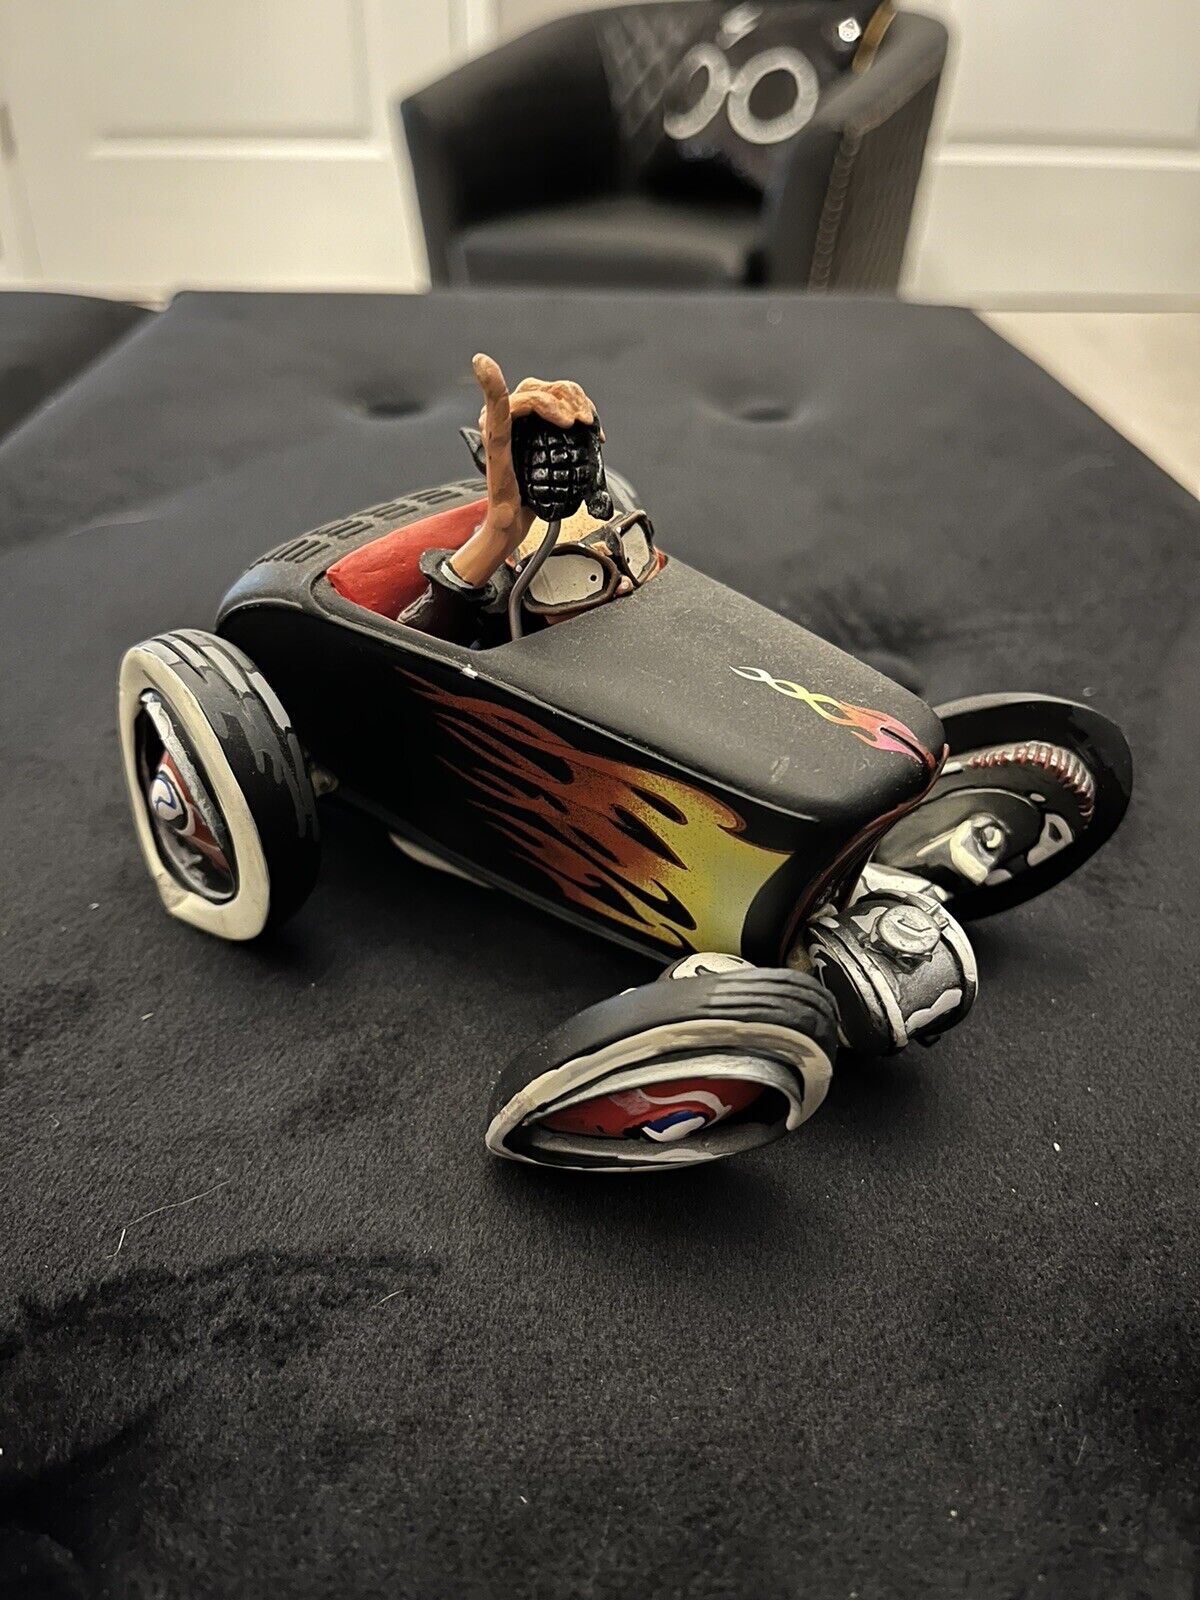 SPEED FREAKS C04548 SO-LO HIGHBOY HOT ROD CAR COUNTRY ARTISTS RARE